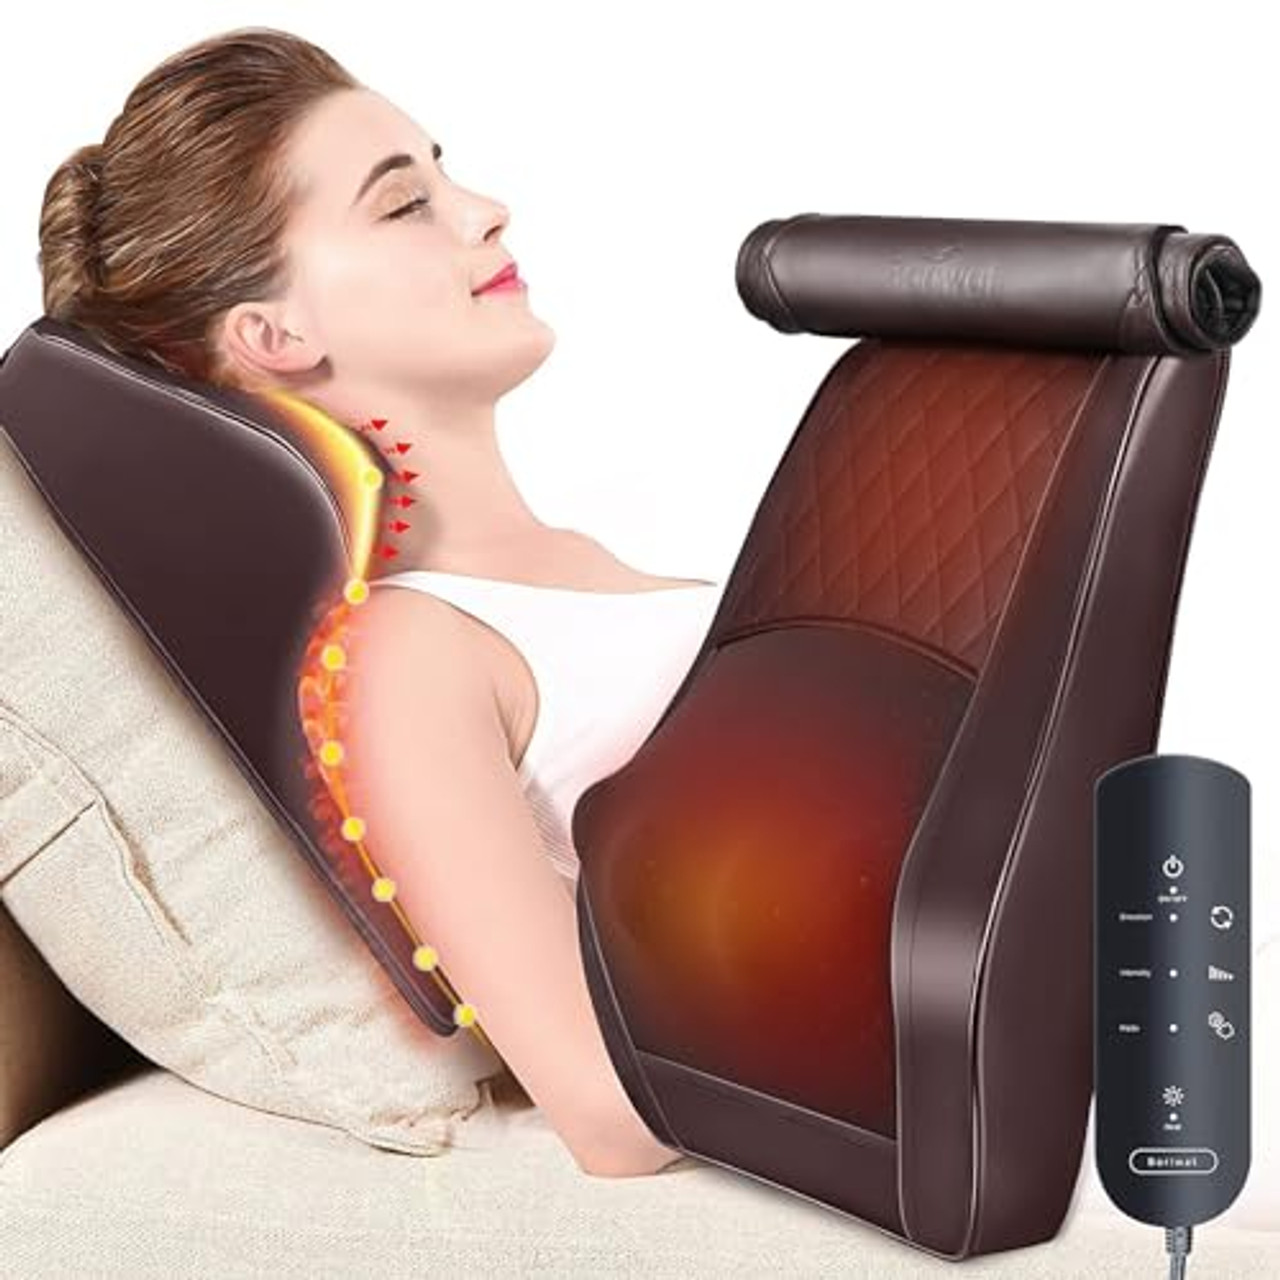  Neck Massager with Heat, Kneading Back Massager, Shiatsu  Shoulder Massage for Back Neck Shoulder, Anniversary, Retirement Gifts for  Women, Men, Valentines Day Christmas Presents for Mom, Dad, Everyone :  Health 